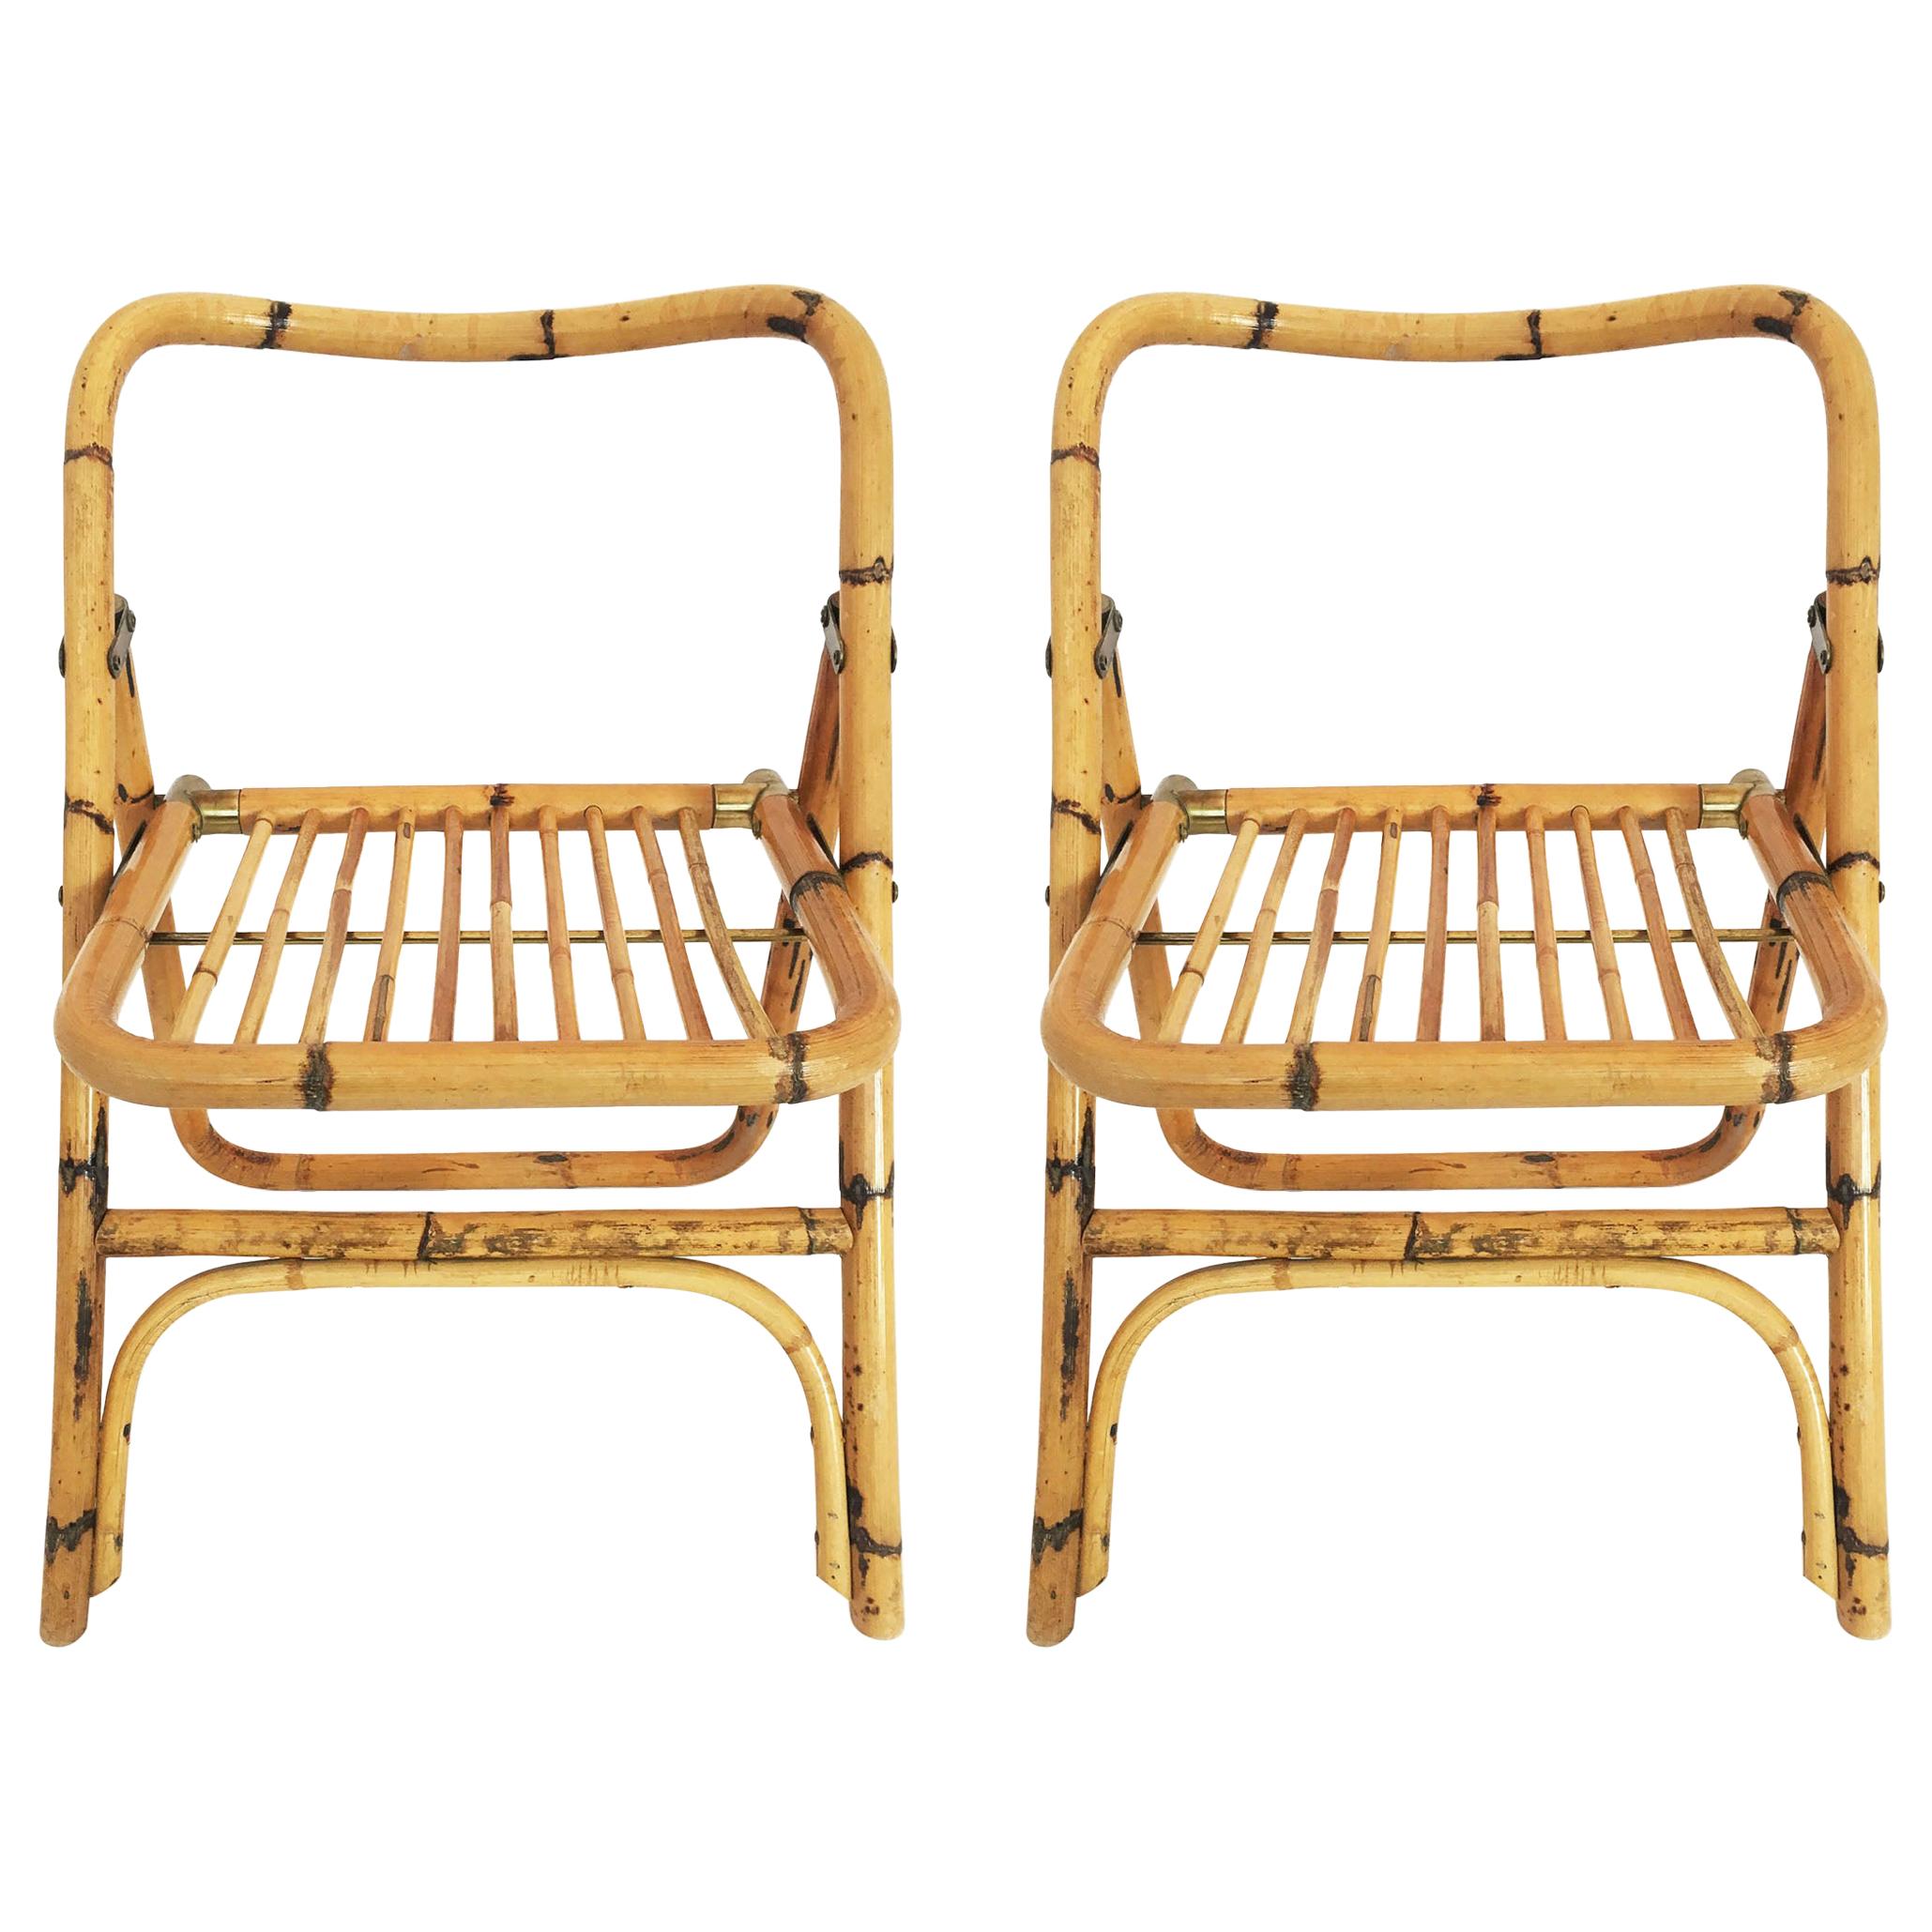 Folding Bamboo Chairs by Dalvera, Italy 1970s For Sale